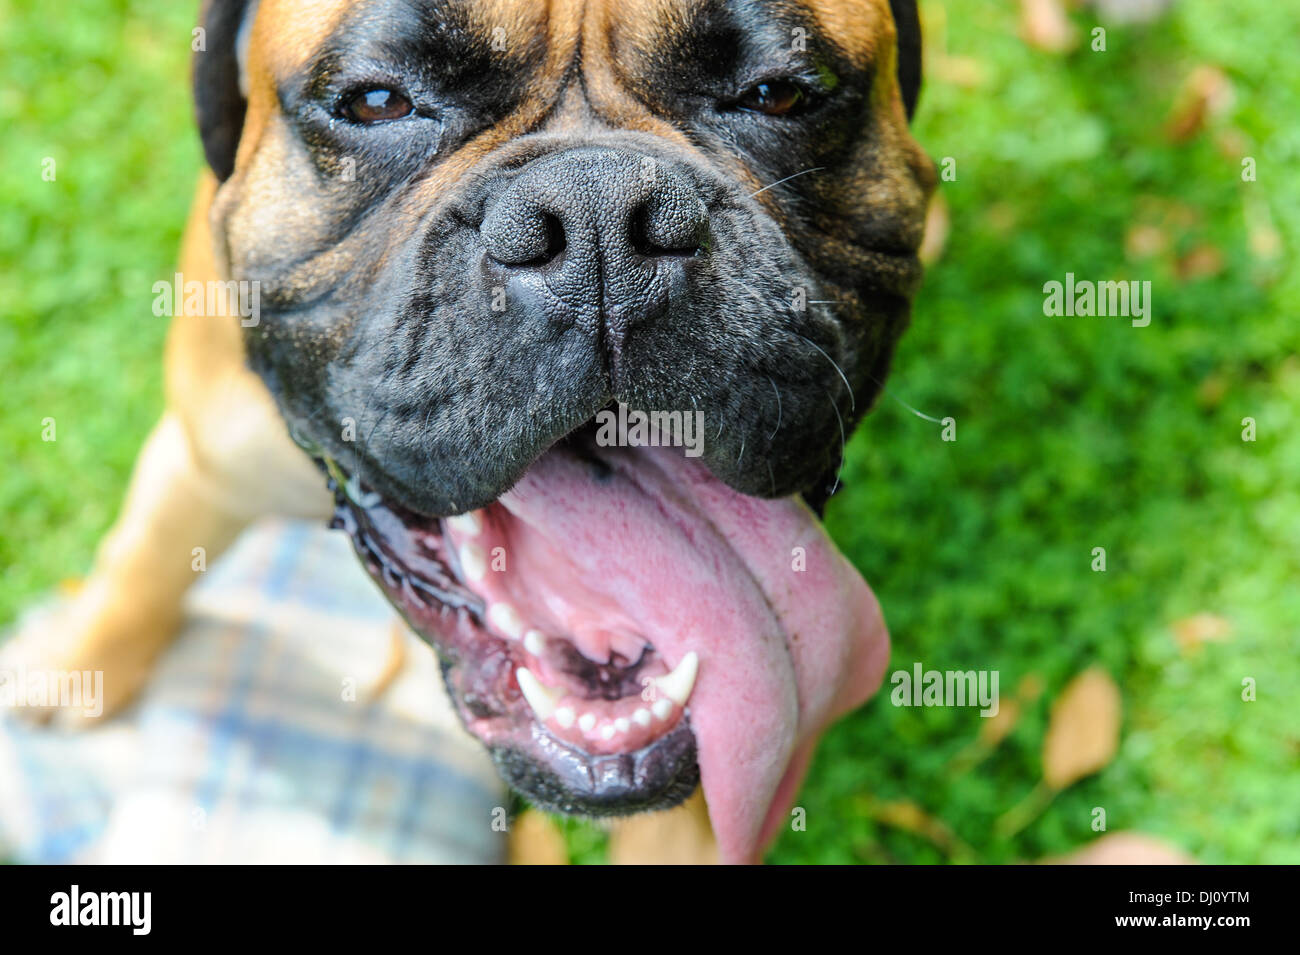 Purebred boxer dog with his tongue out and his mouth open against a green grass background Stock Photo